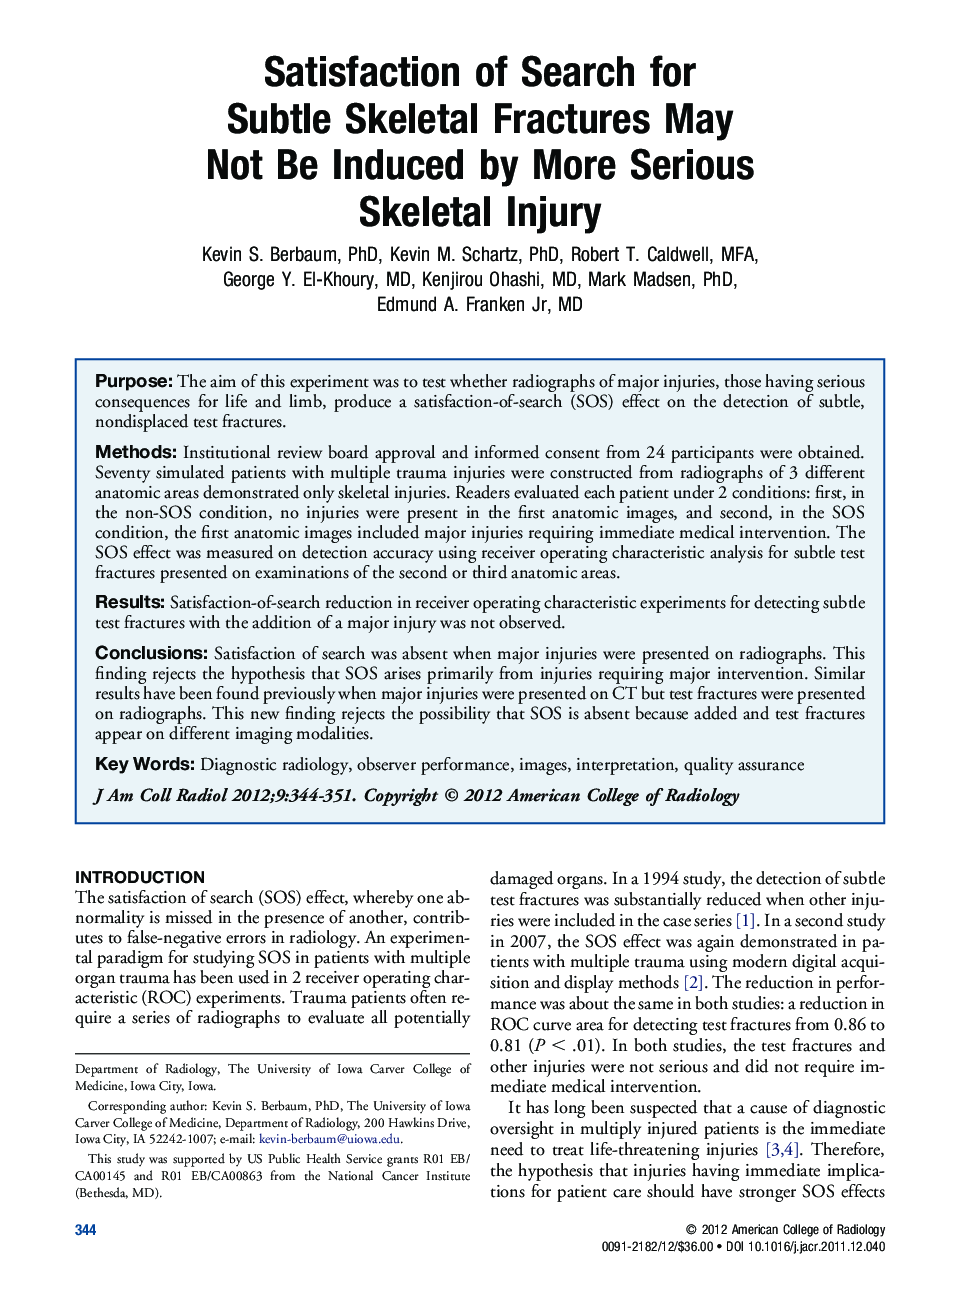 Satisfaction of Search for Subtle Skeletal Fractures May Not Be Induced by More Serious Skeletal Injury